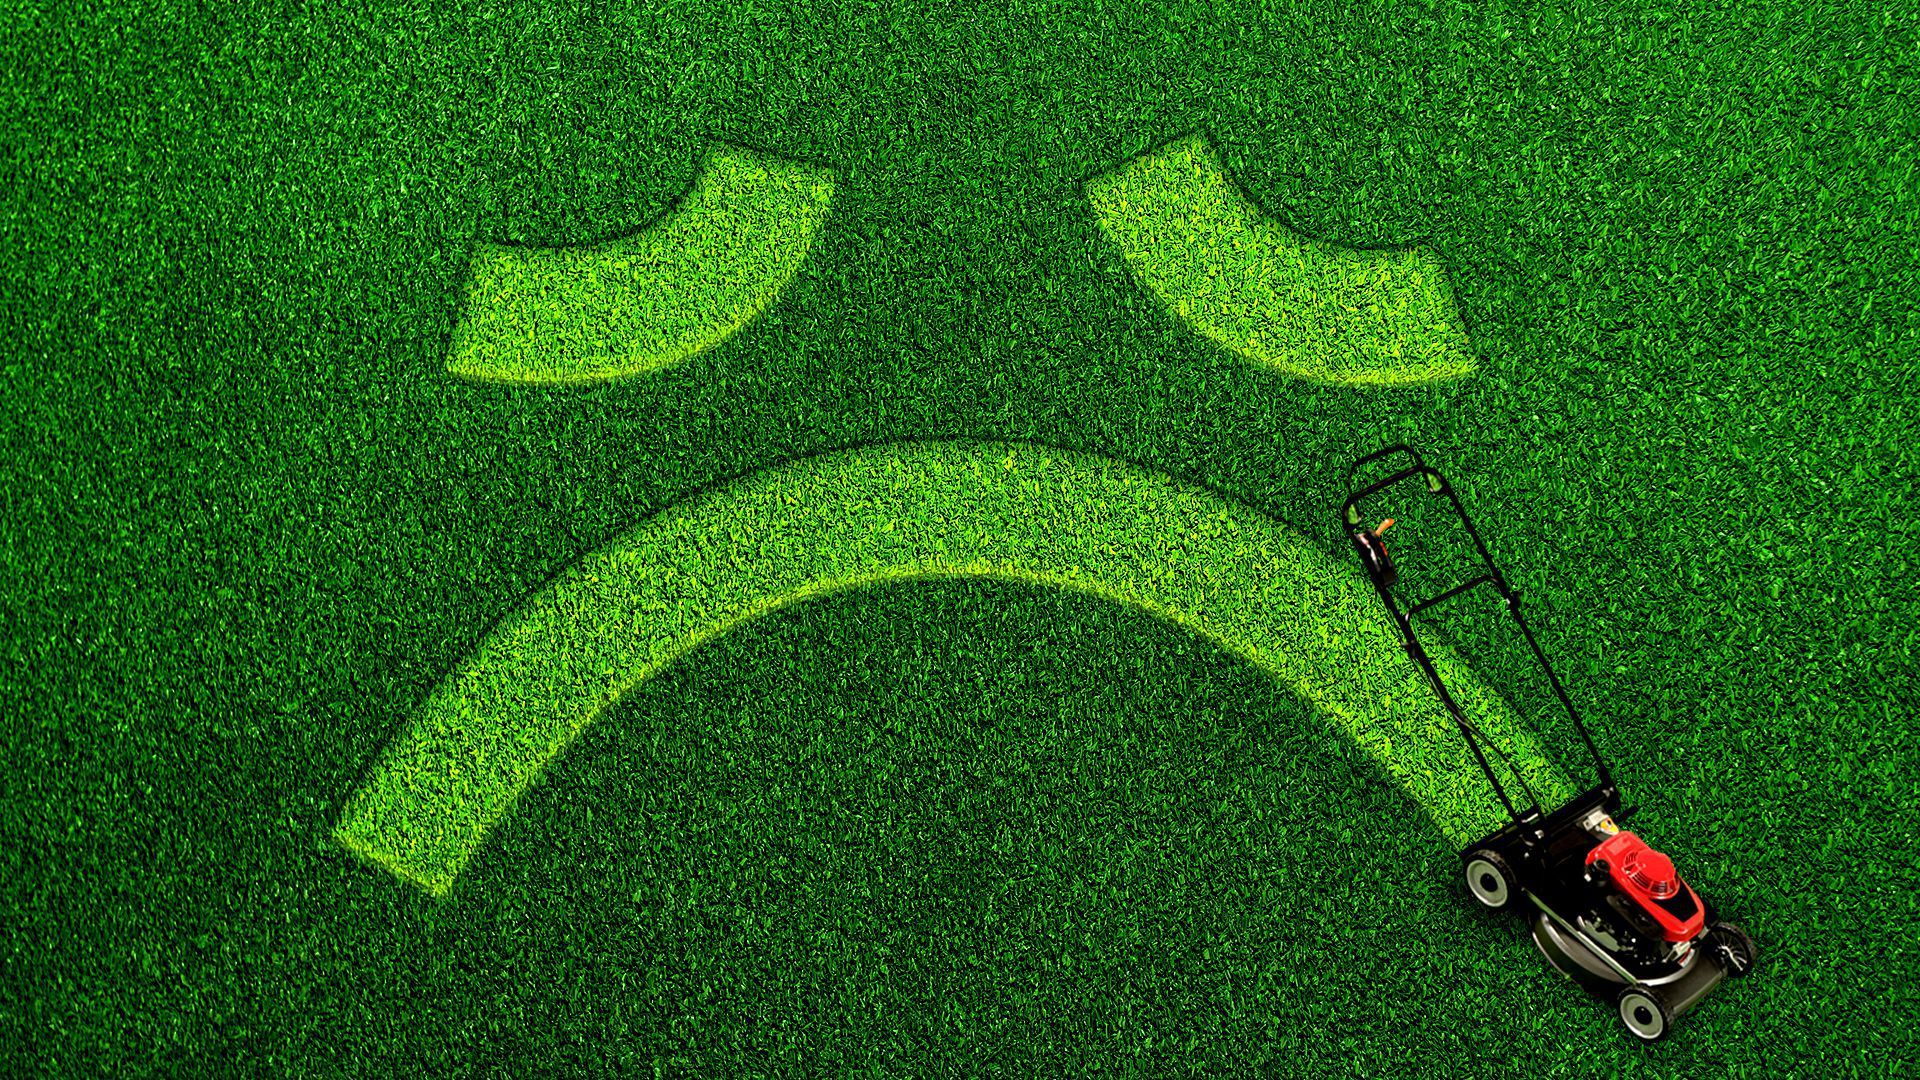 Illustration of a lawn mower drawing a frown